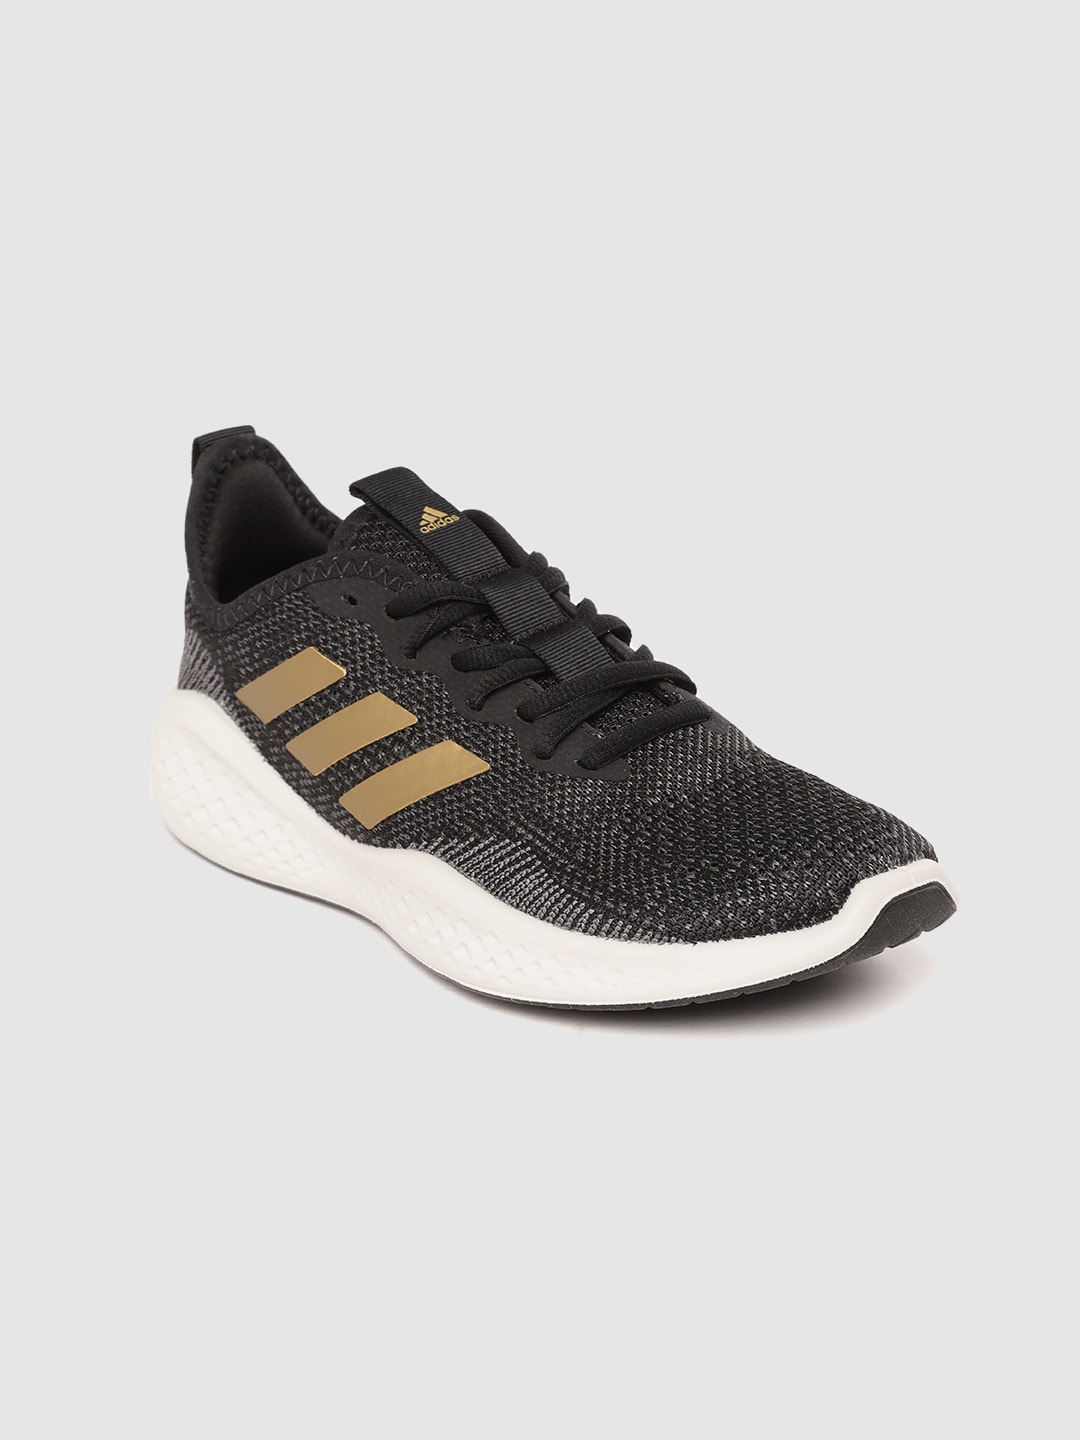 ADIDAS Women Black Woven Design Fluidflow Running Shoes Price in India